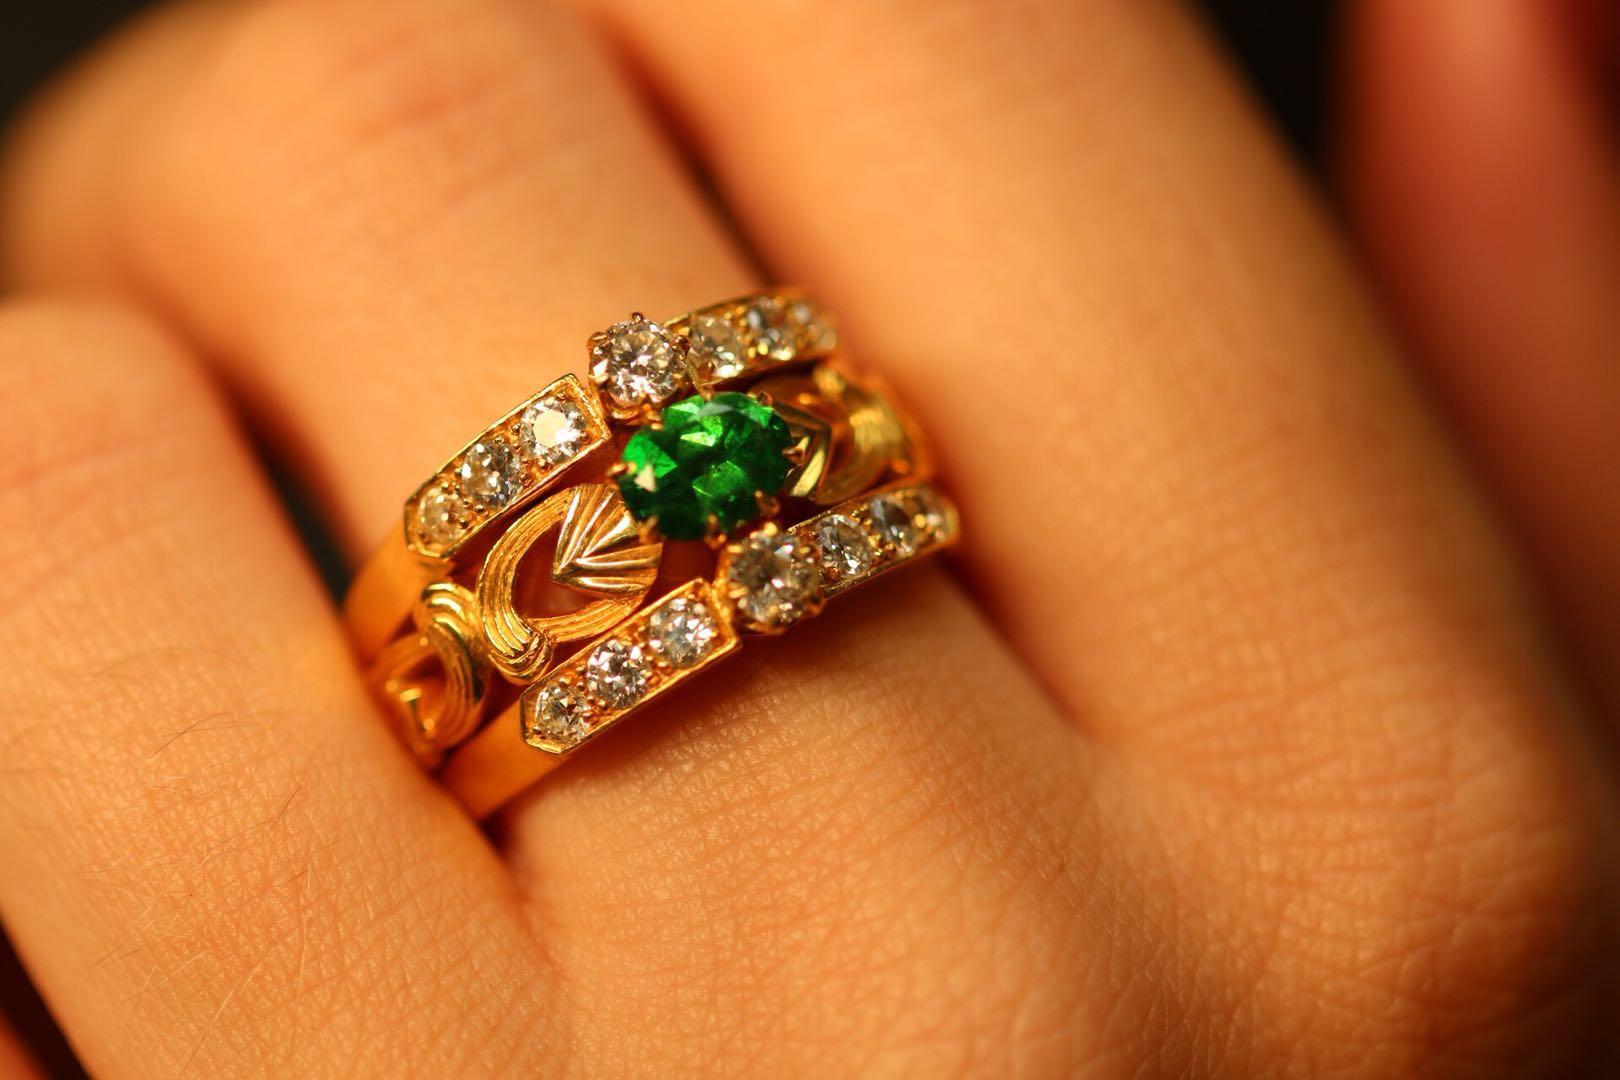 This absolutely mesmerising ring captures the Art Nouveau style wonderfully, the beautiful flowing scroll motif in rich 18 karat gold against the vivid green colour of the demantoid garnet which measures at 0.81ct (6.1mm x 4.5mm x 2.8mm).

Bordering